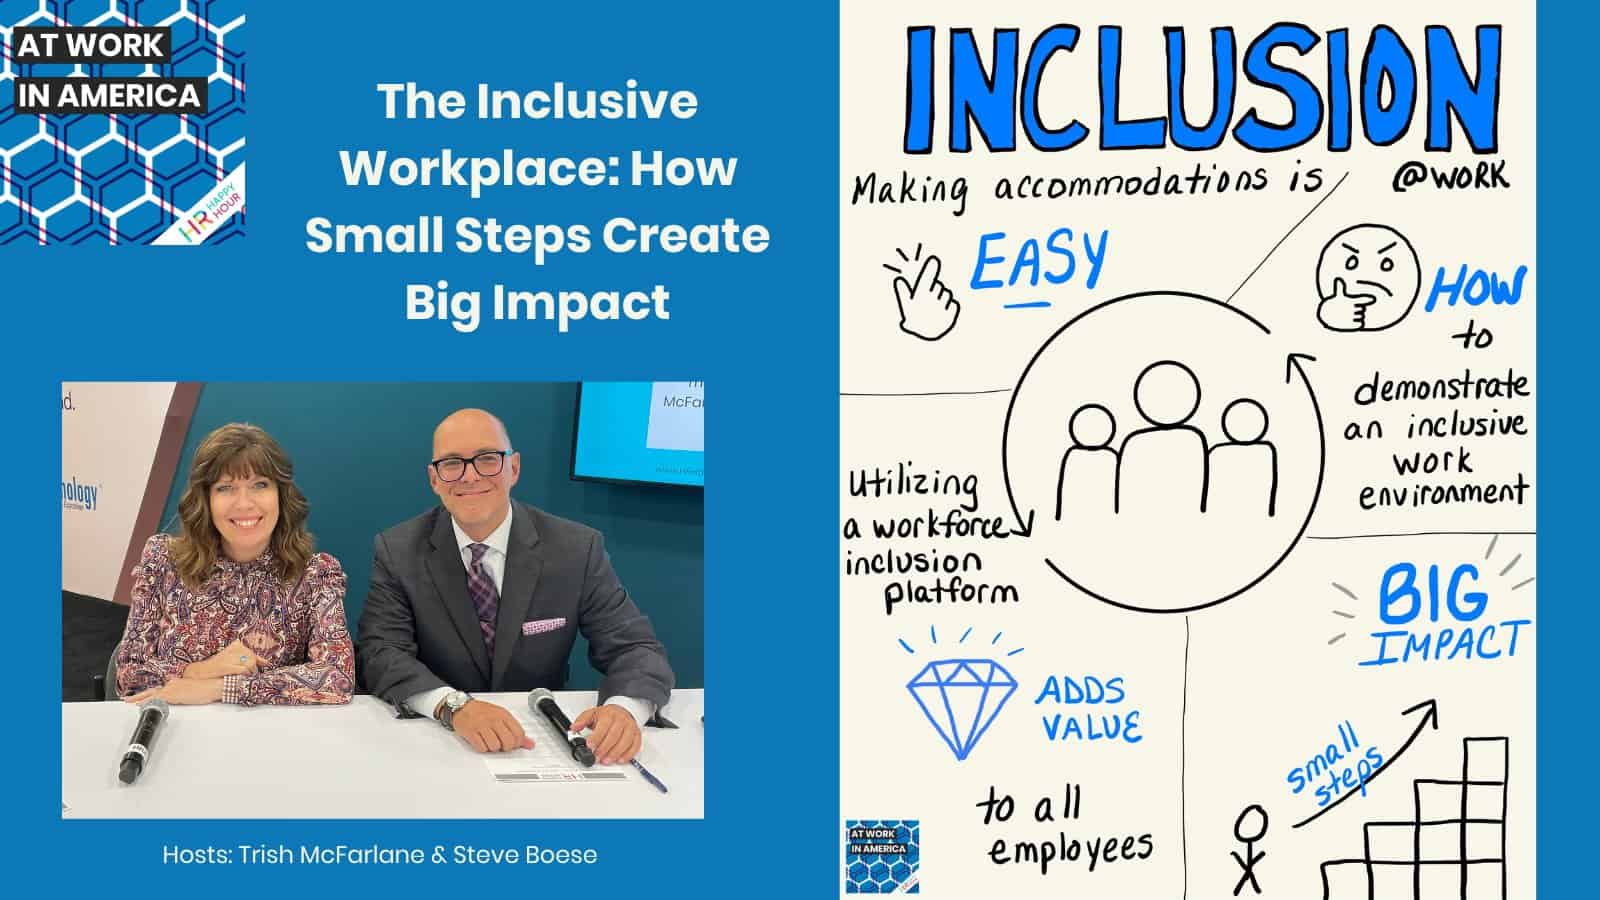 The Inclusive workplace